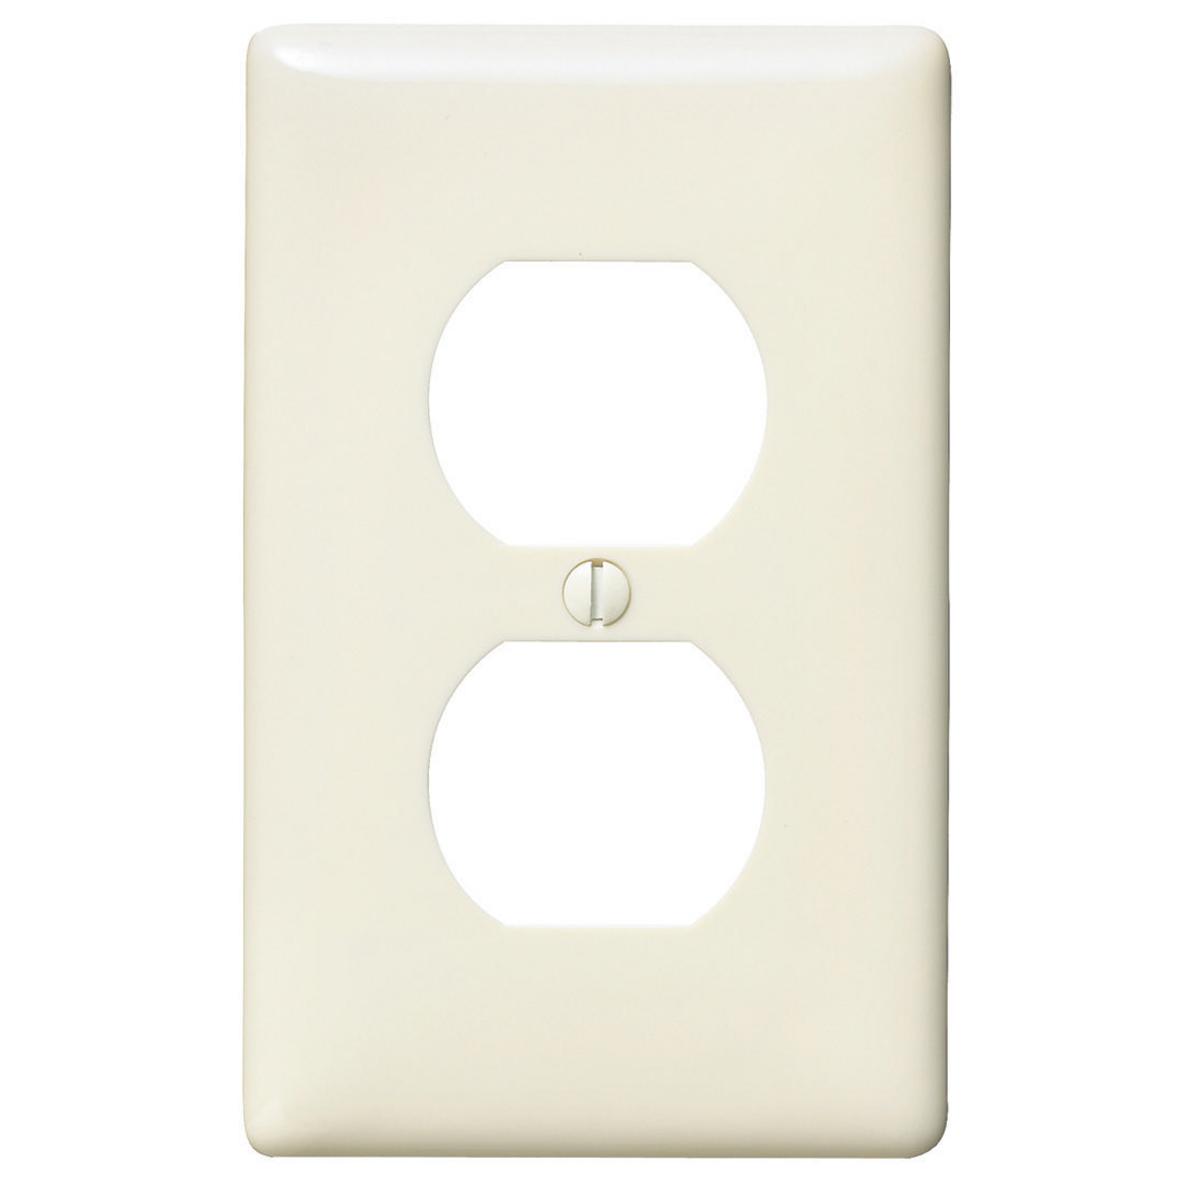 Hubbell NPJ8LA Wallplates and Box Covers, Wallplate, Nylon, Mid-Sized, 1-Gang, 1) Duplex, Light Almond  ; Reinforcement ribs for extra strength ; Captive screw feature holds mounting screw in place ; High-impact, self-extinguishing nylon material ; Standard Size is 1/8"